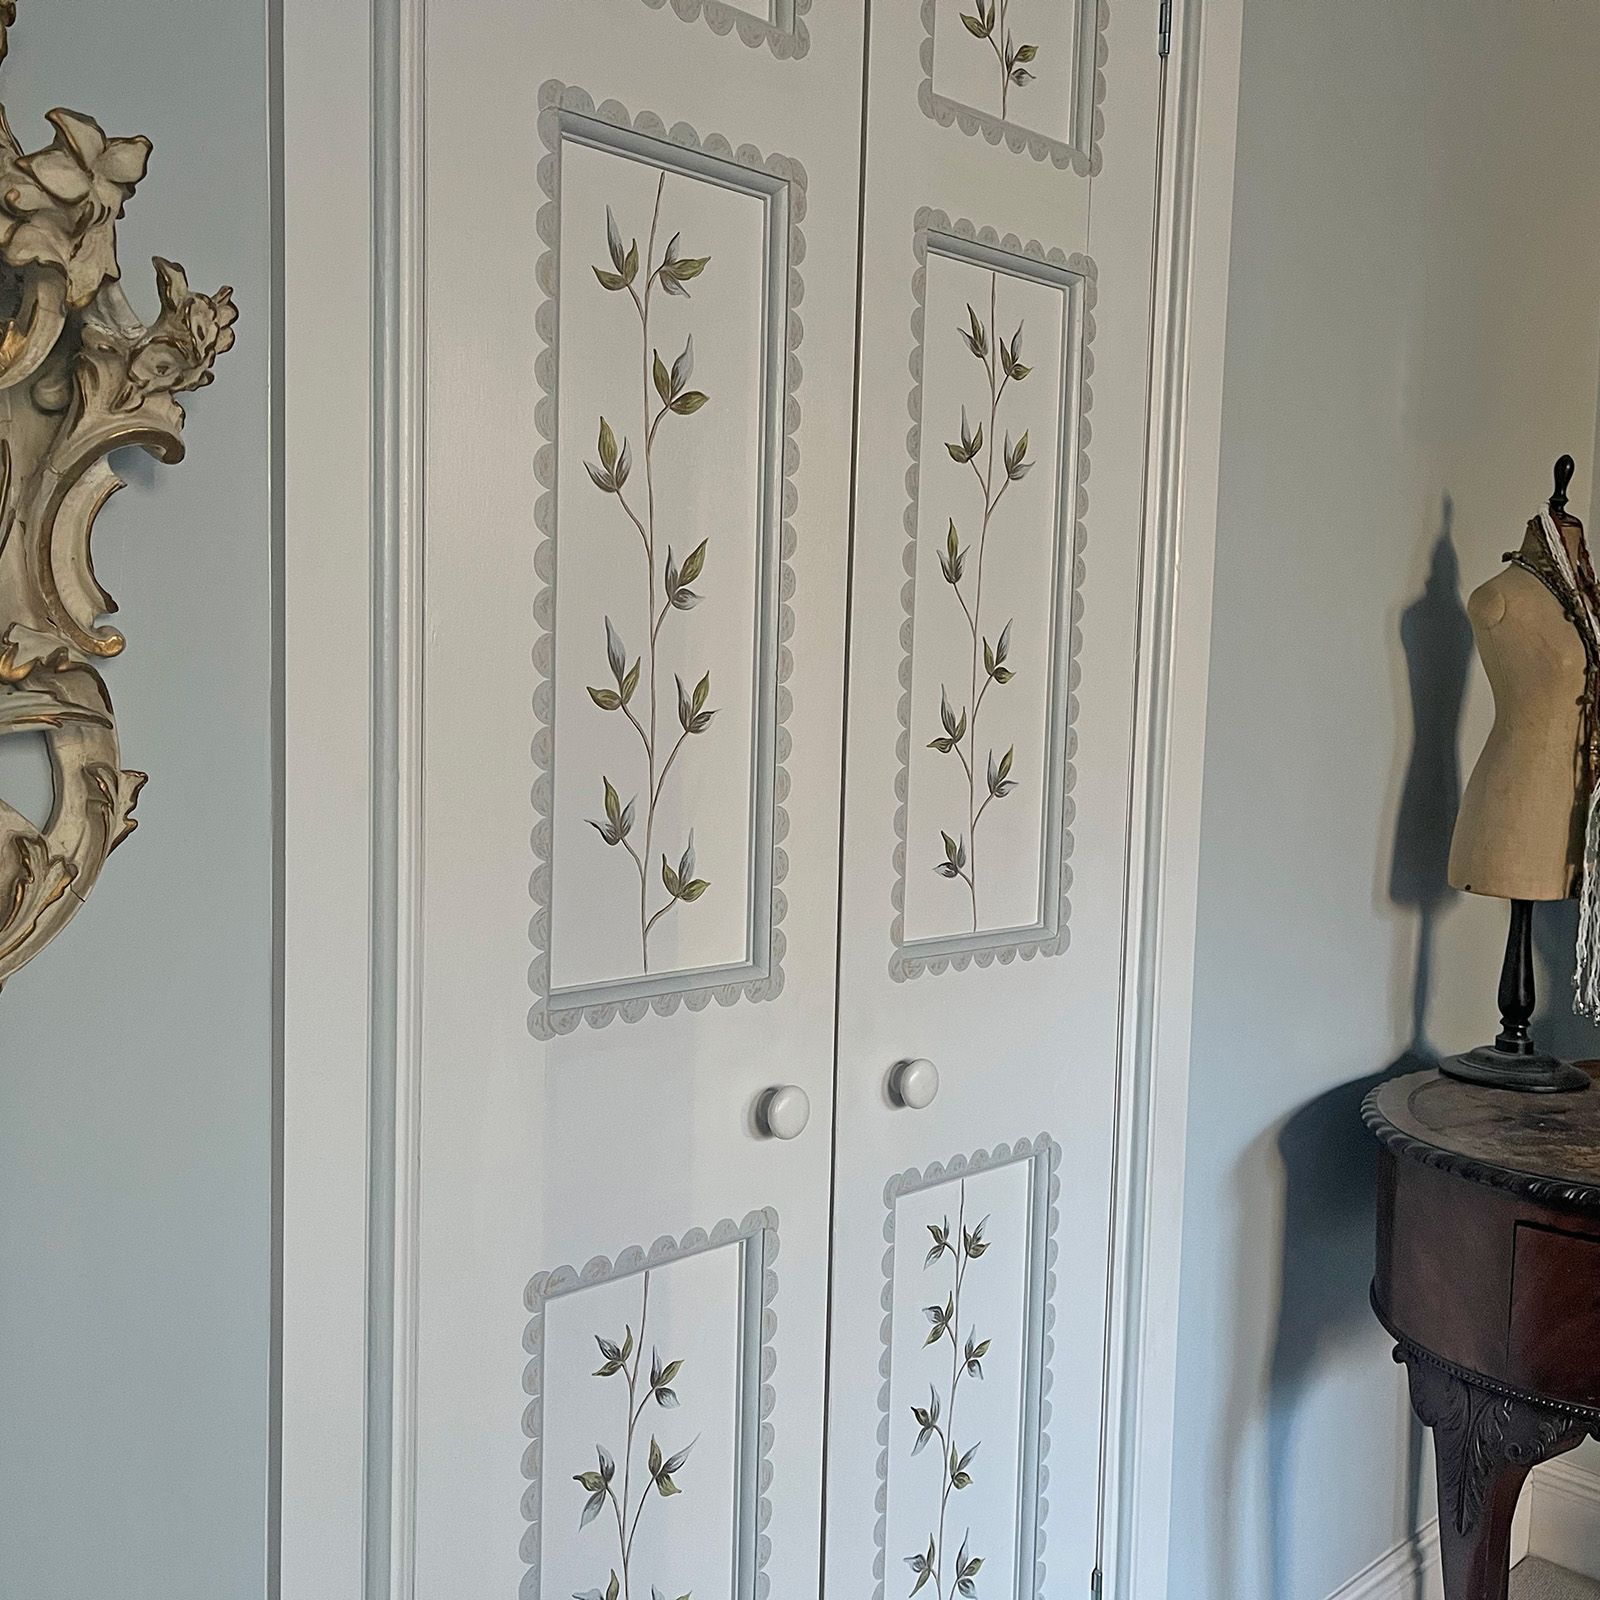 Details on facings and panels of handpainted trellis in a bedroom by Helen Bateman upcycled